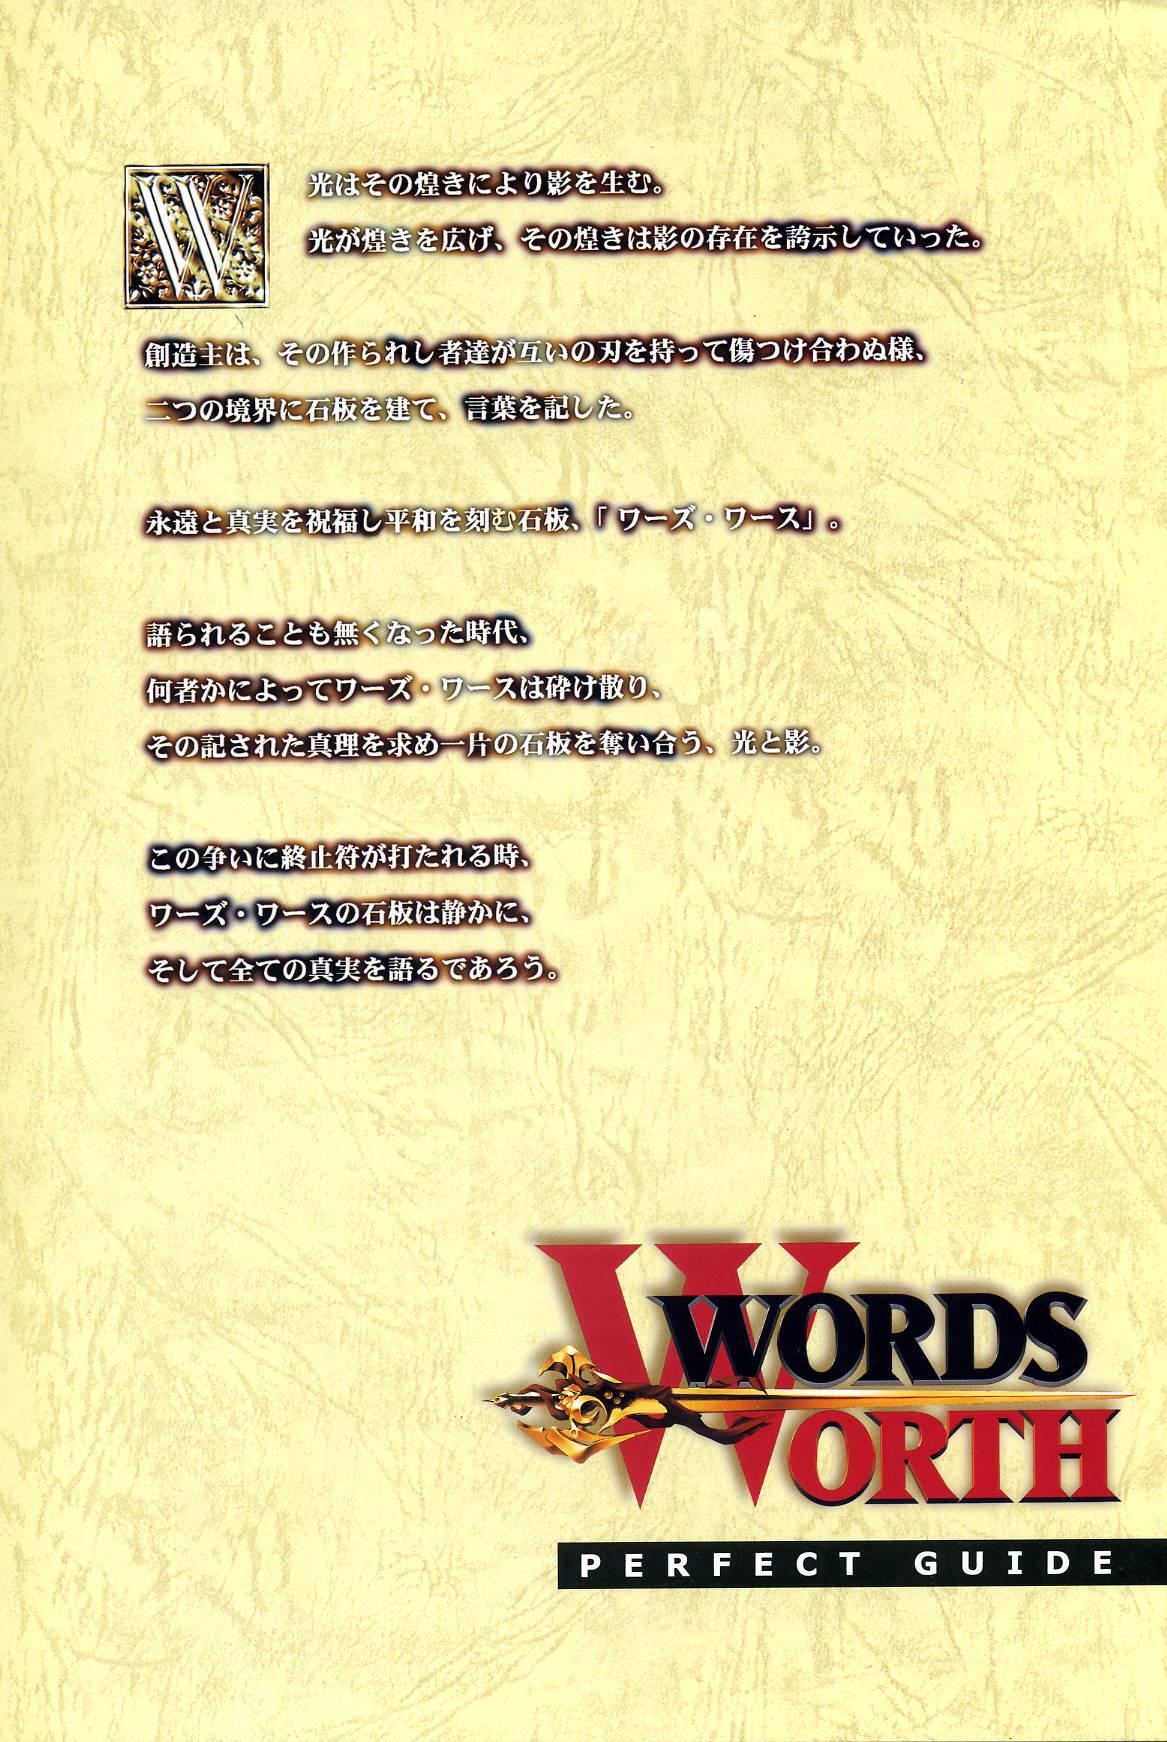 Gay Outdoors WORDS WORTH 完全ガイド - Words worth Gay Youngmen - Page 2